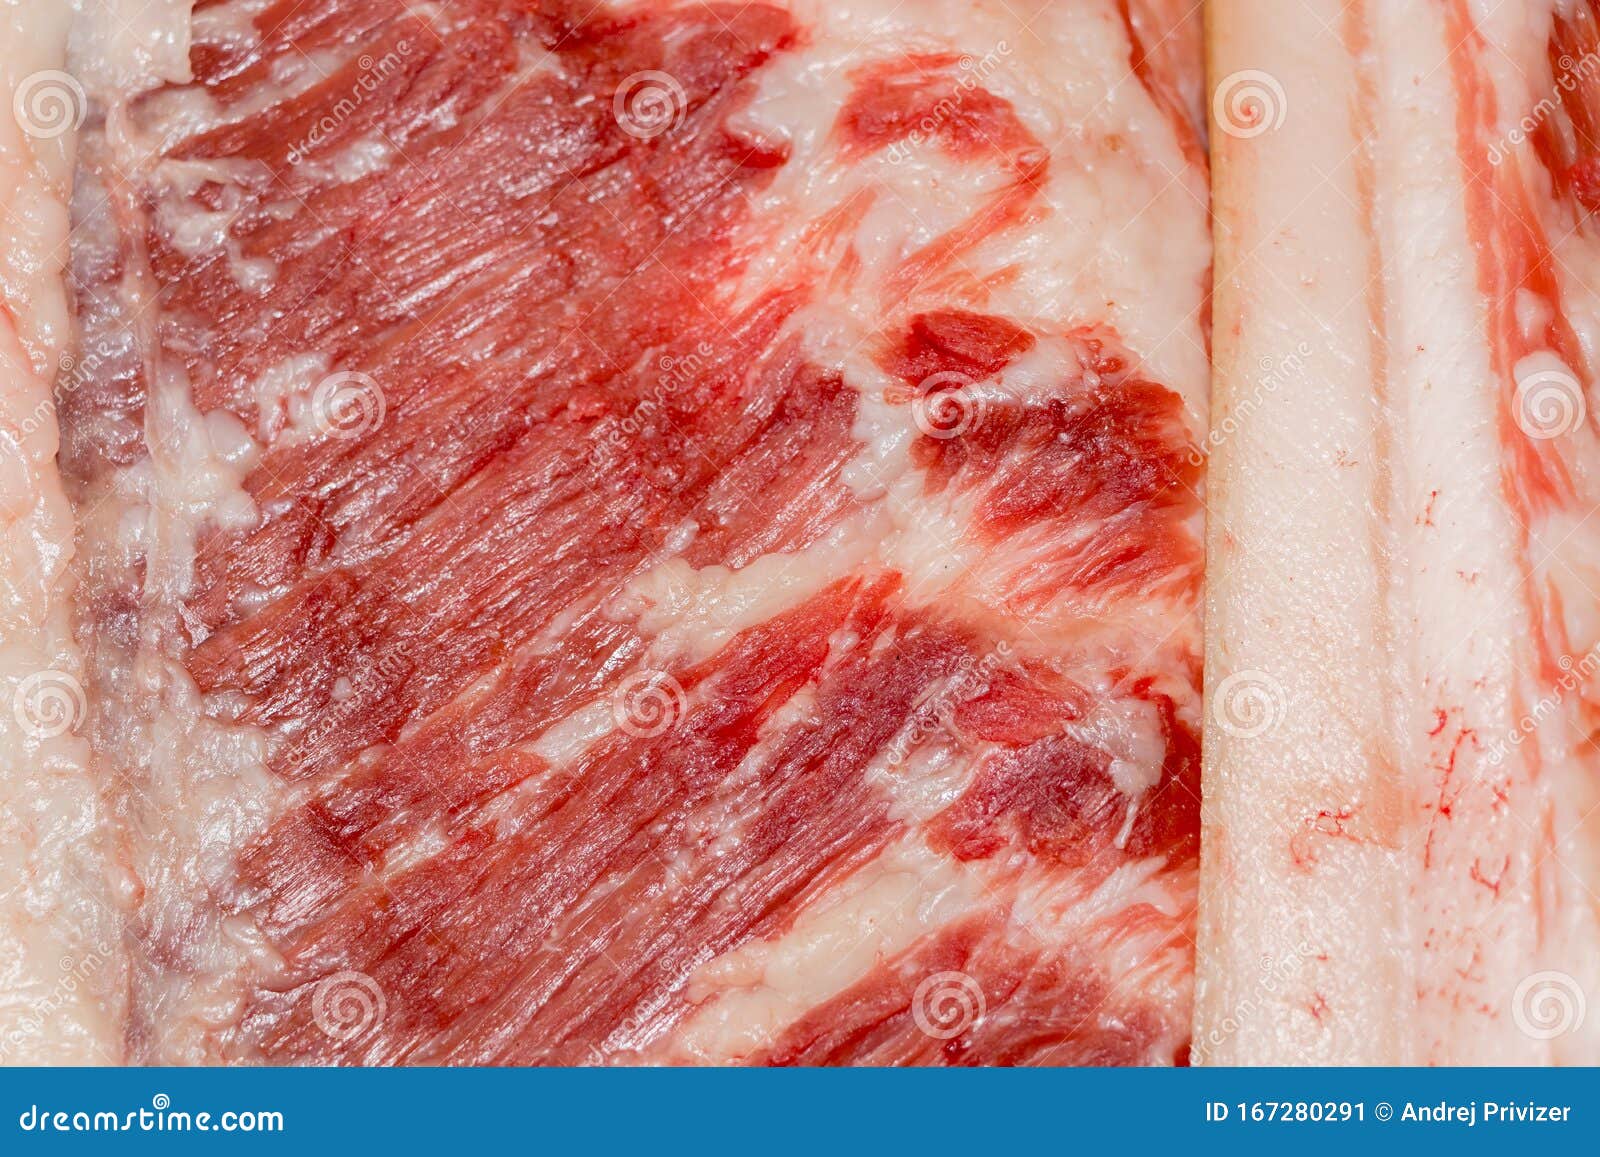 Education Anatomy and Histological Sample of Muscle Tissue and Adipose  Tissue Close Up. Selective Focus Stock Image - Image of myocardium,  healthy: 167280291